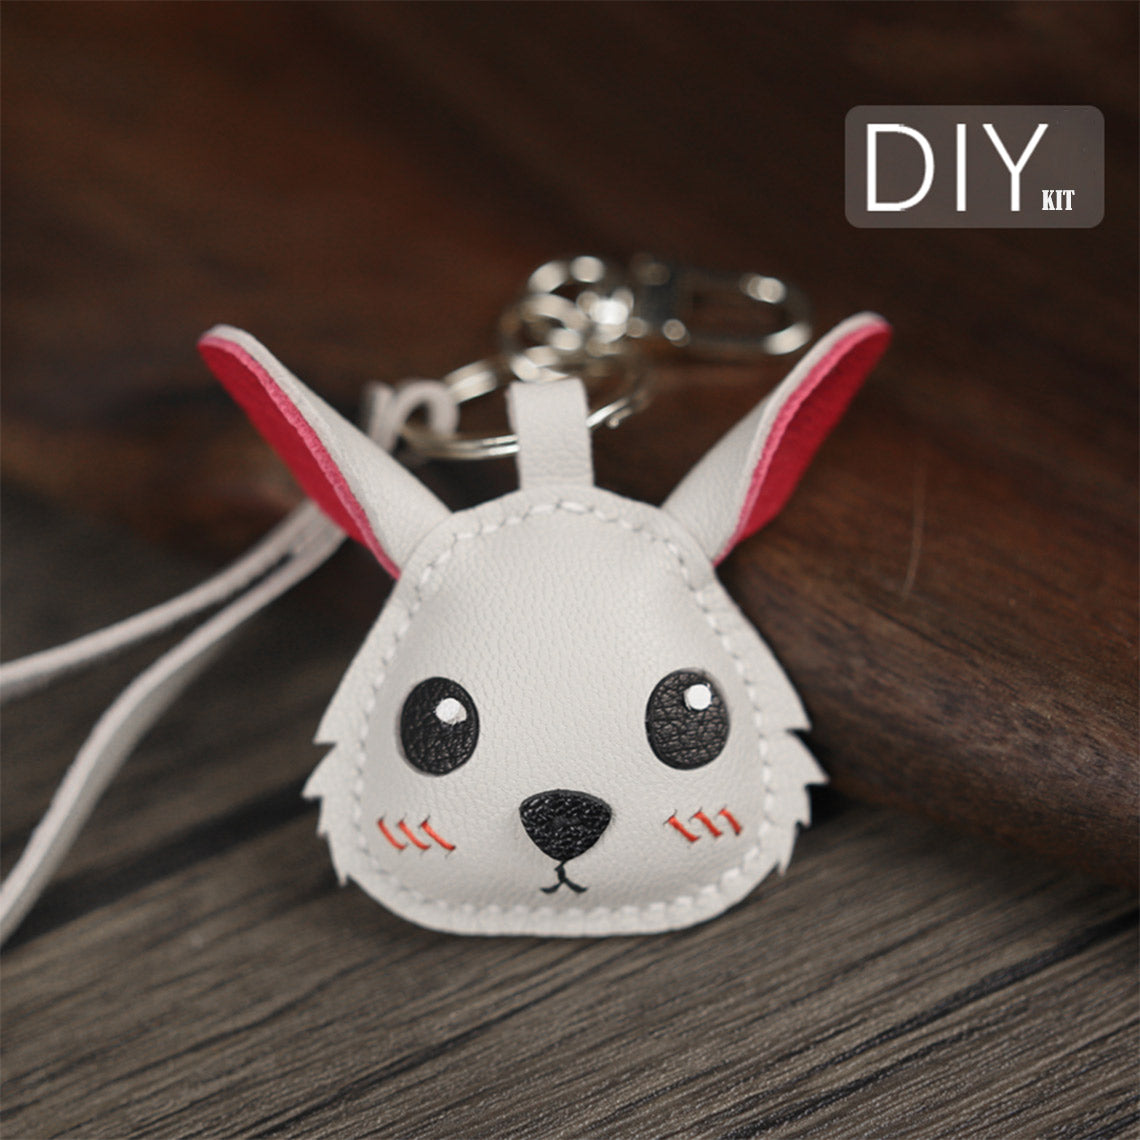 Rabbit Charm, DIY Kit to Make A Cute Leather Rabbit Charm Keychain - POPSEWING™